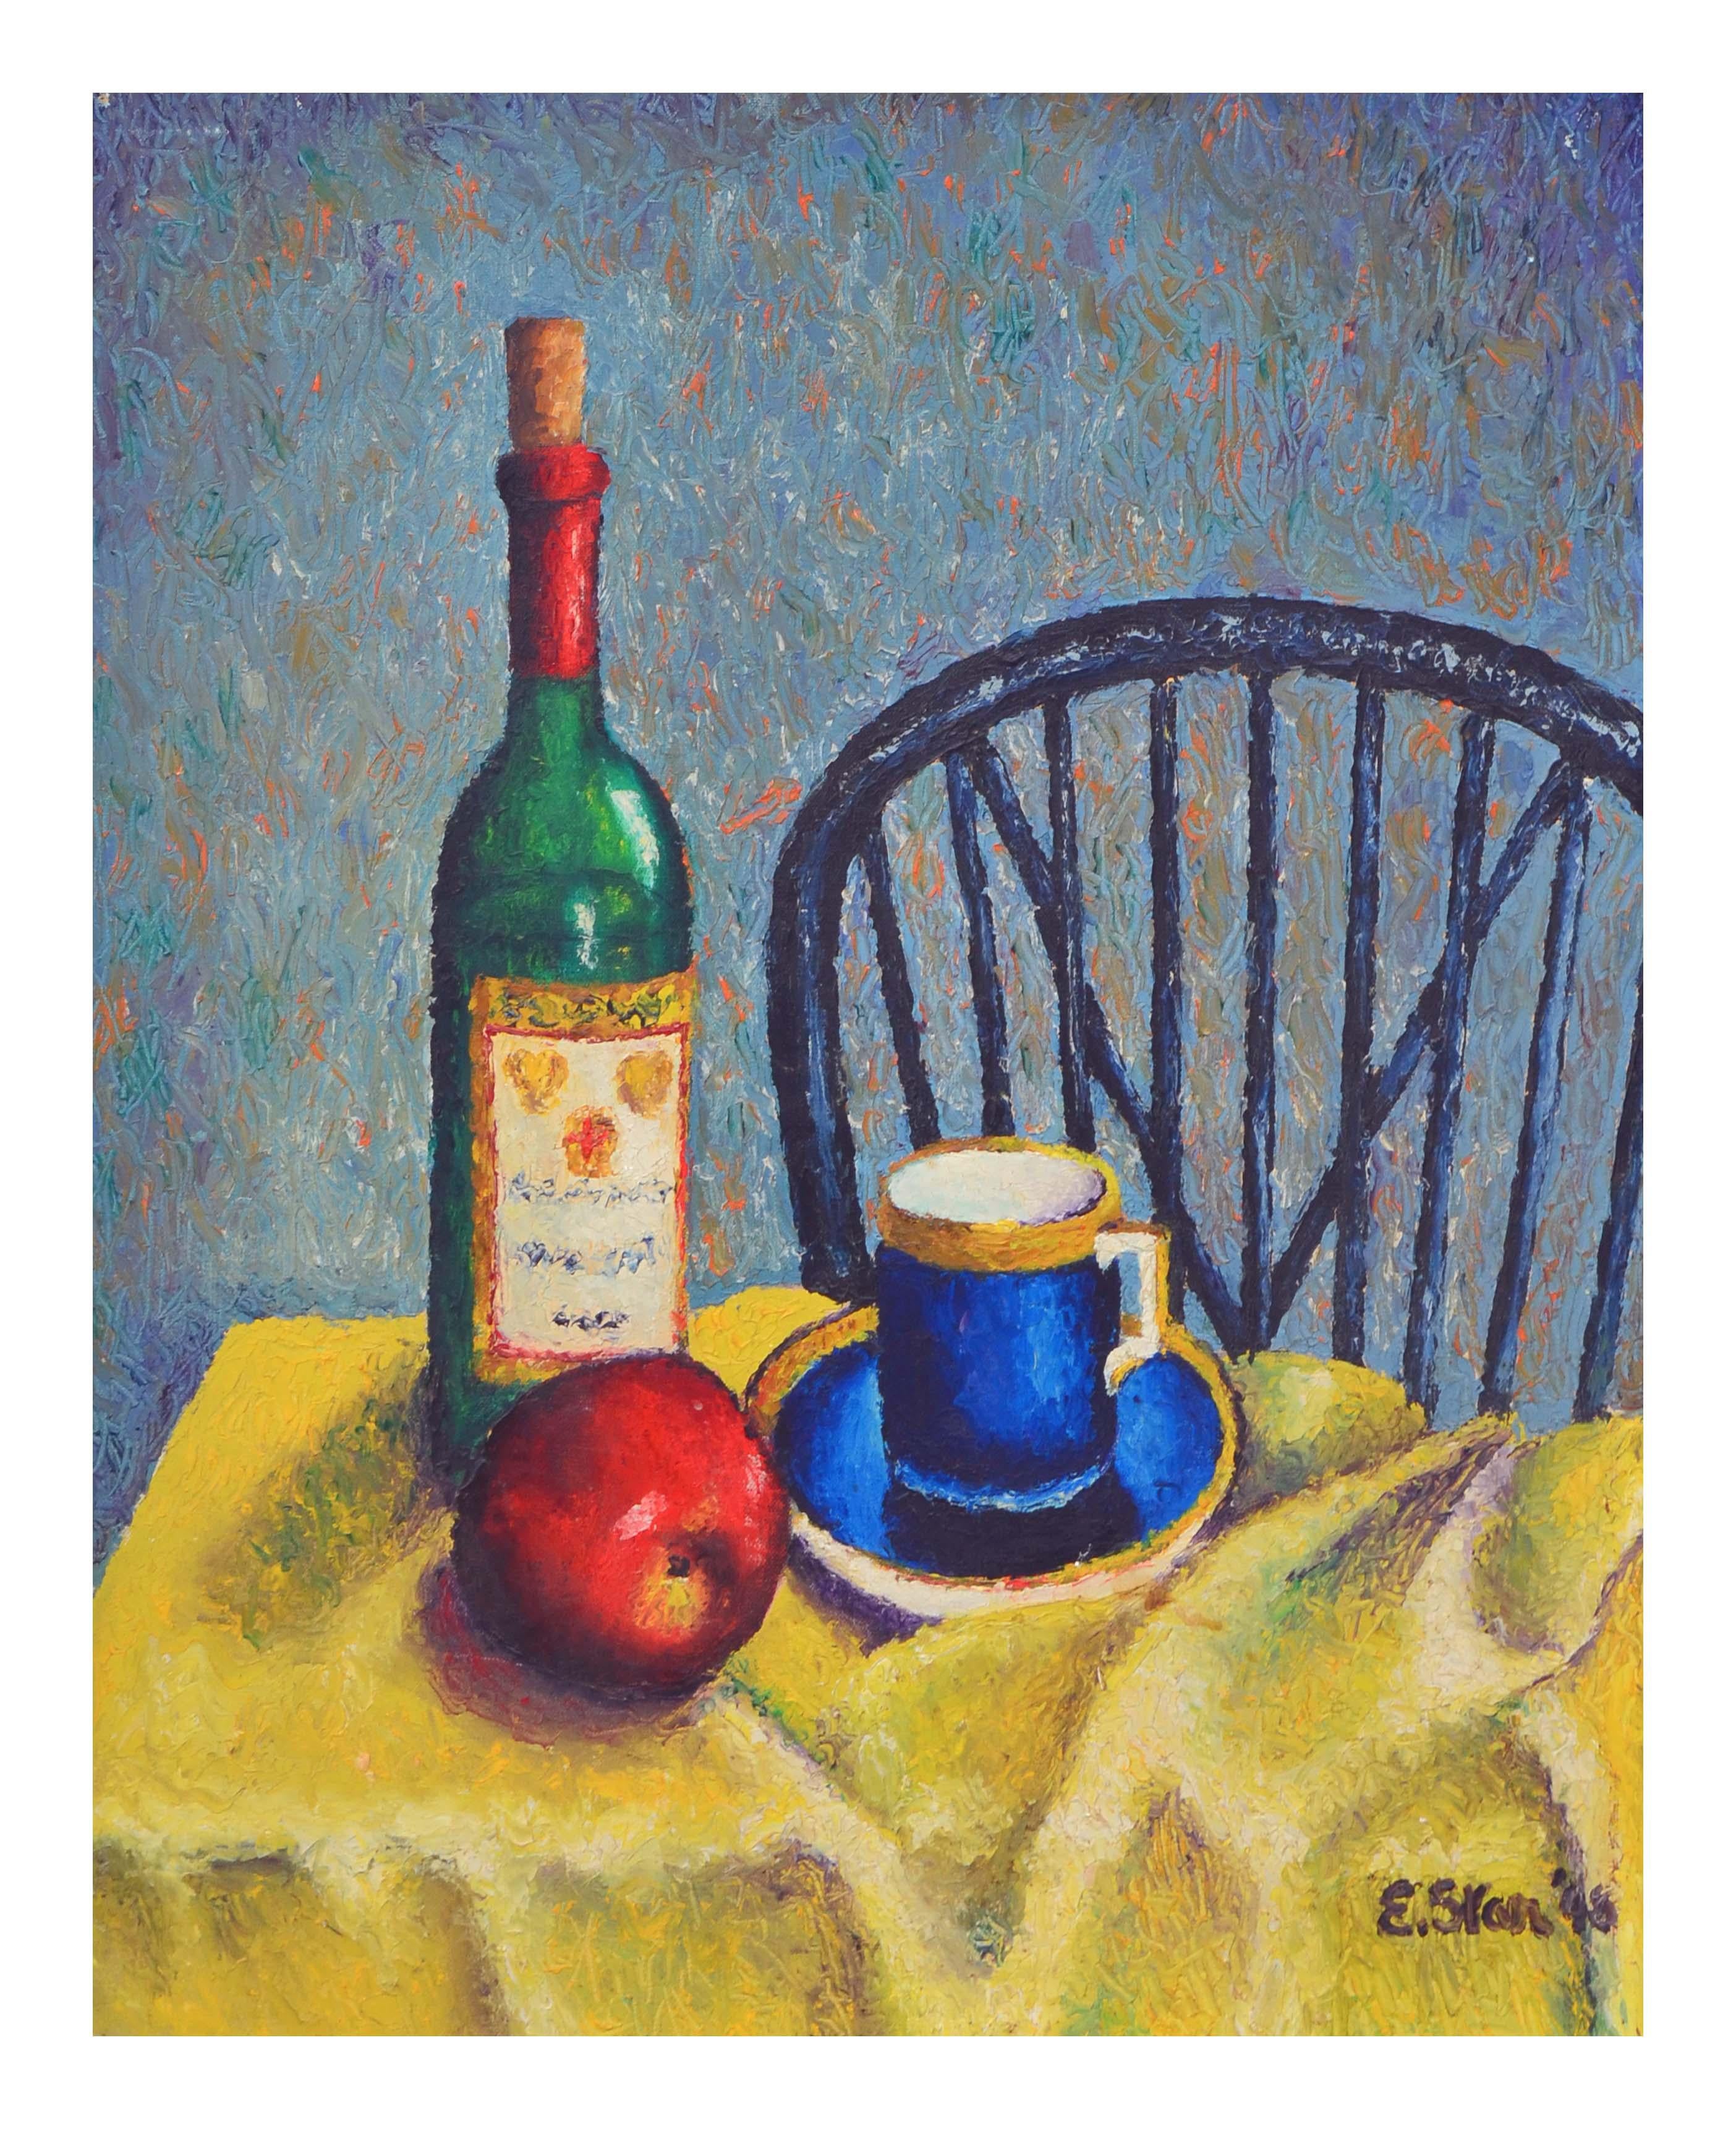 Apple & Wine Bottle Vibrant Contemporary Still-Life  - Painting by E. Star